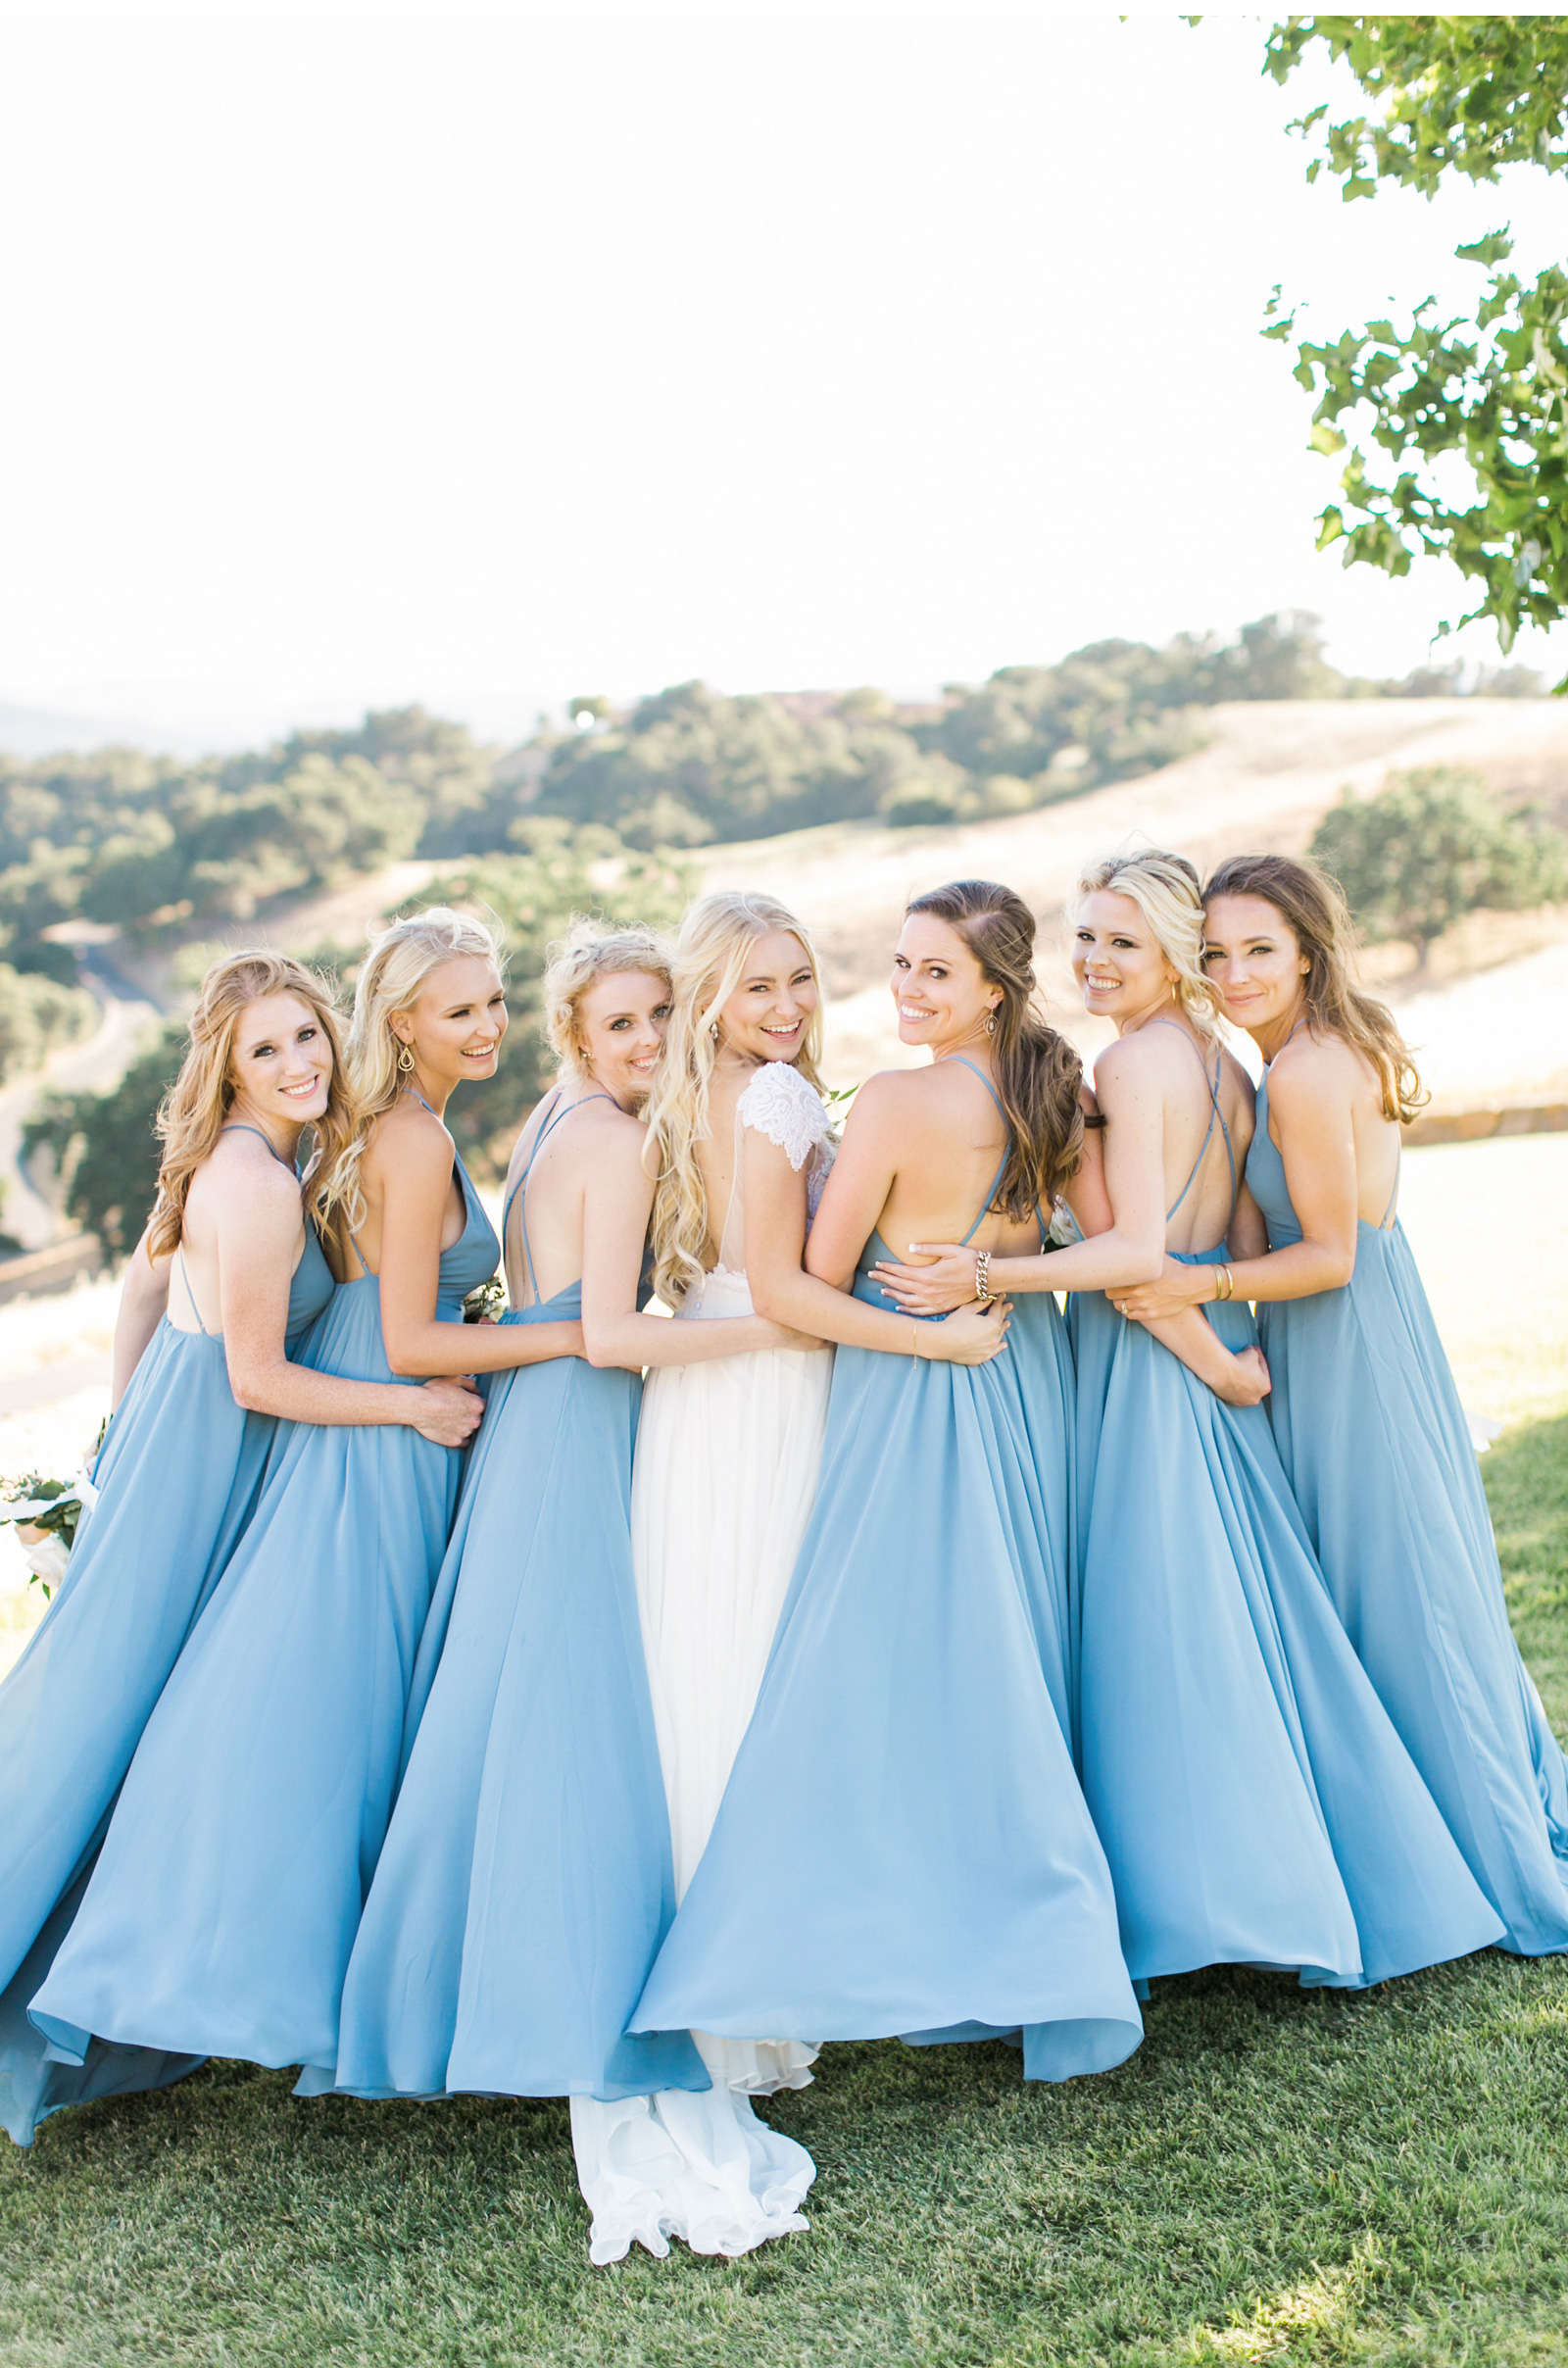 Paso-Robles-Style-Me-Pretty-The-Knot-Wedding-Natalie-Schutt-Photography's-Wedding_06.jpg